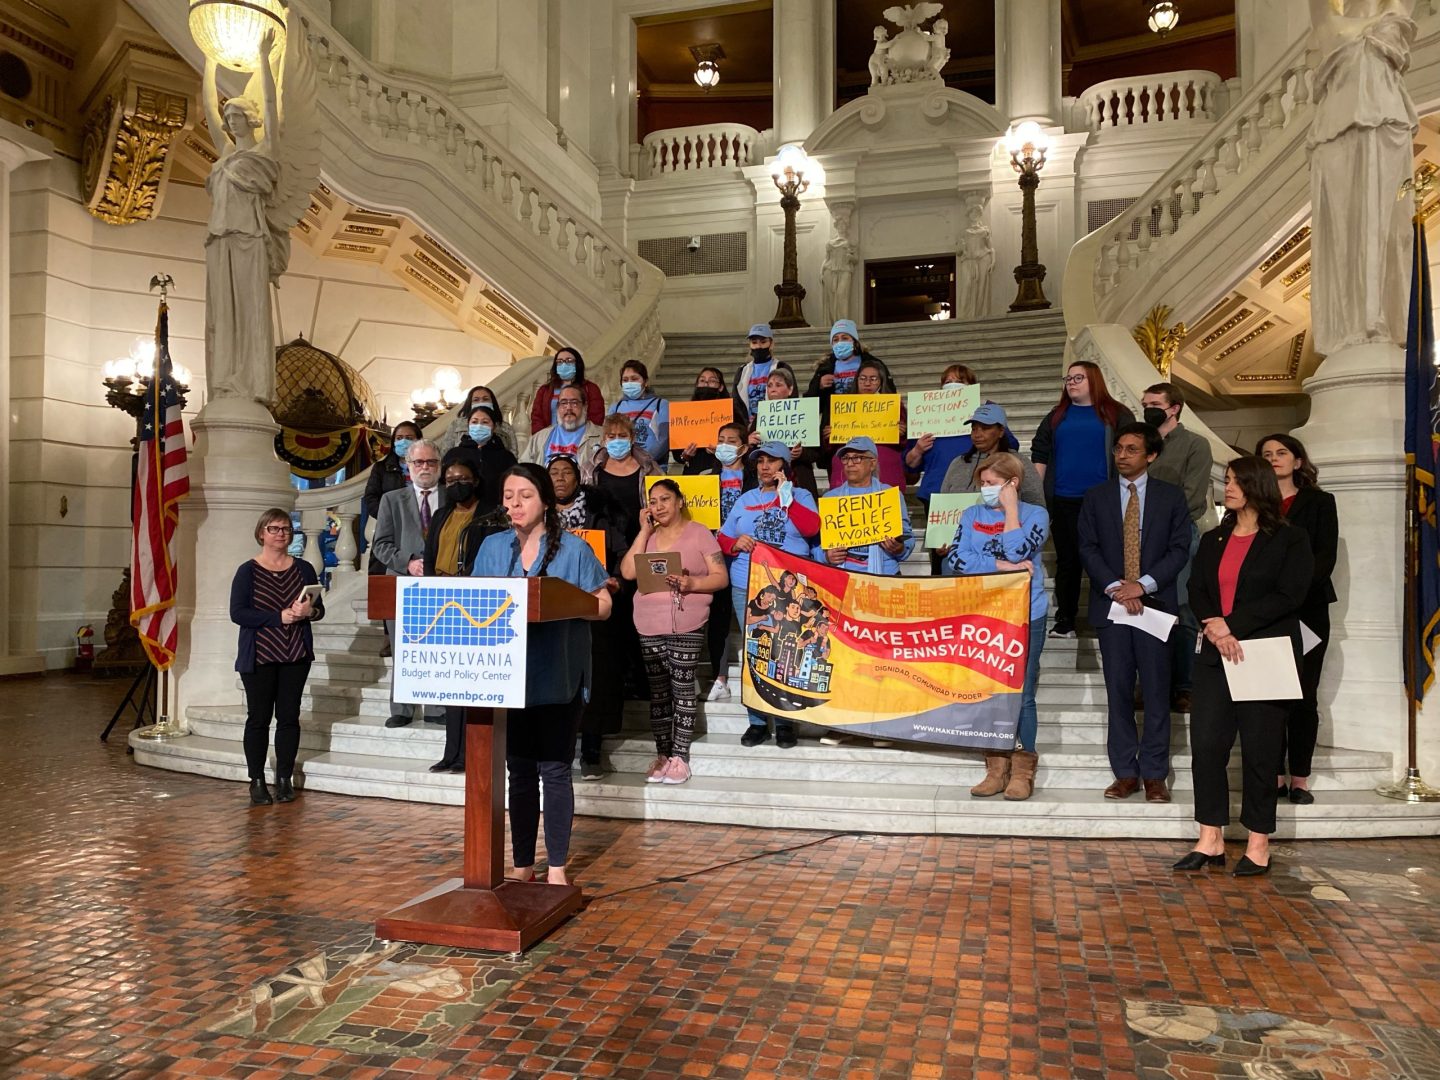 Pennsylvania needs rental assistance and eviction diversion programs, activists and lawmakers say